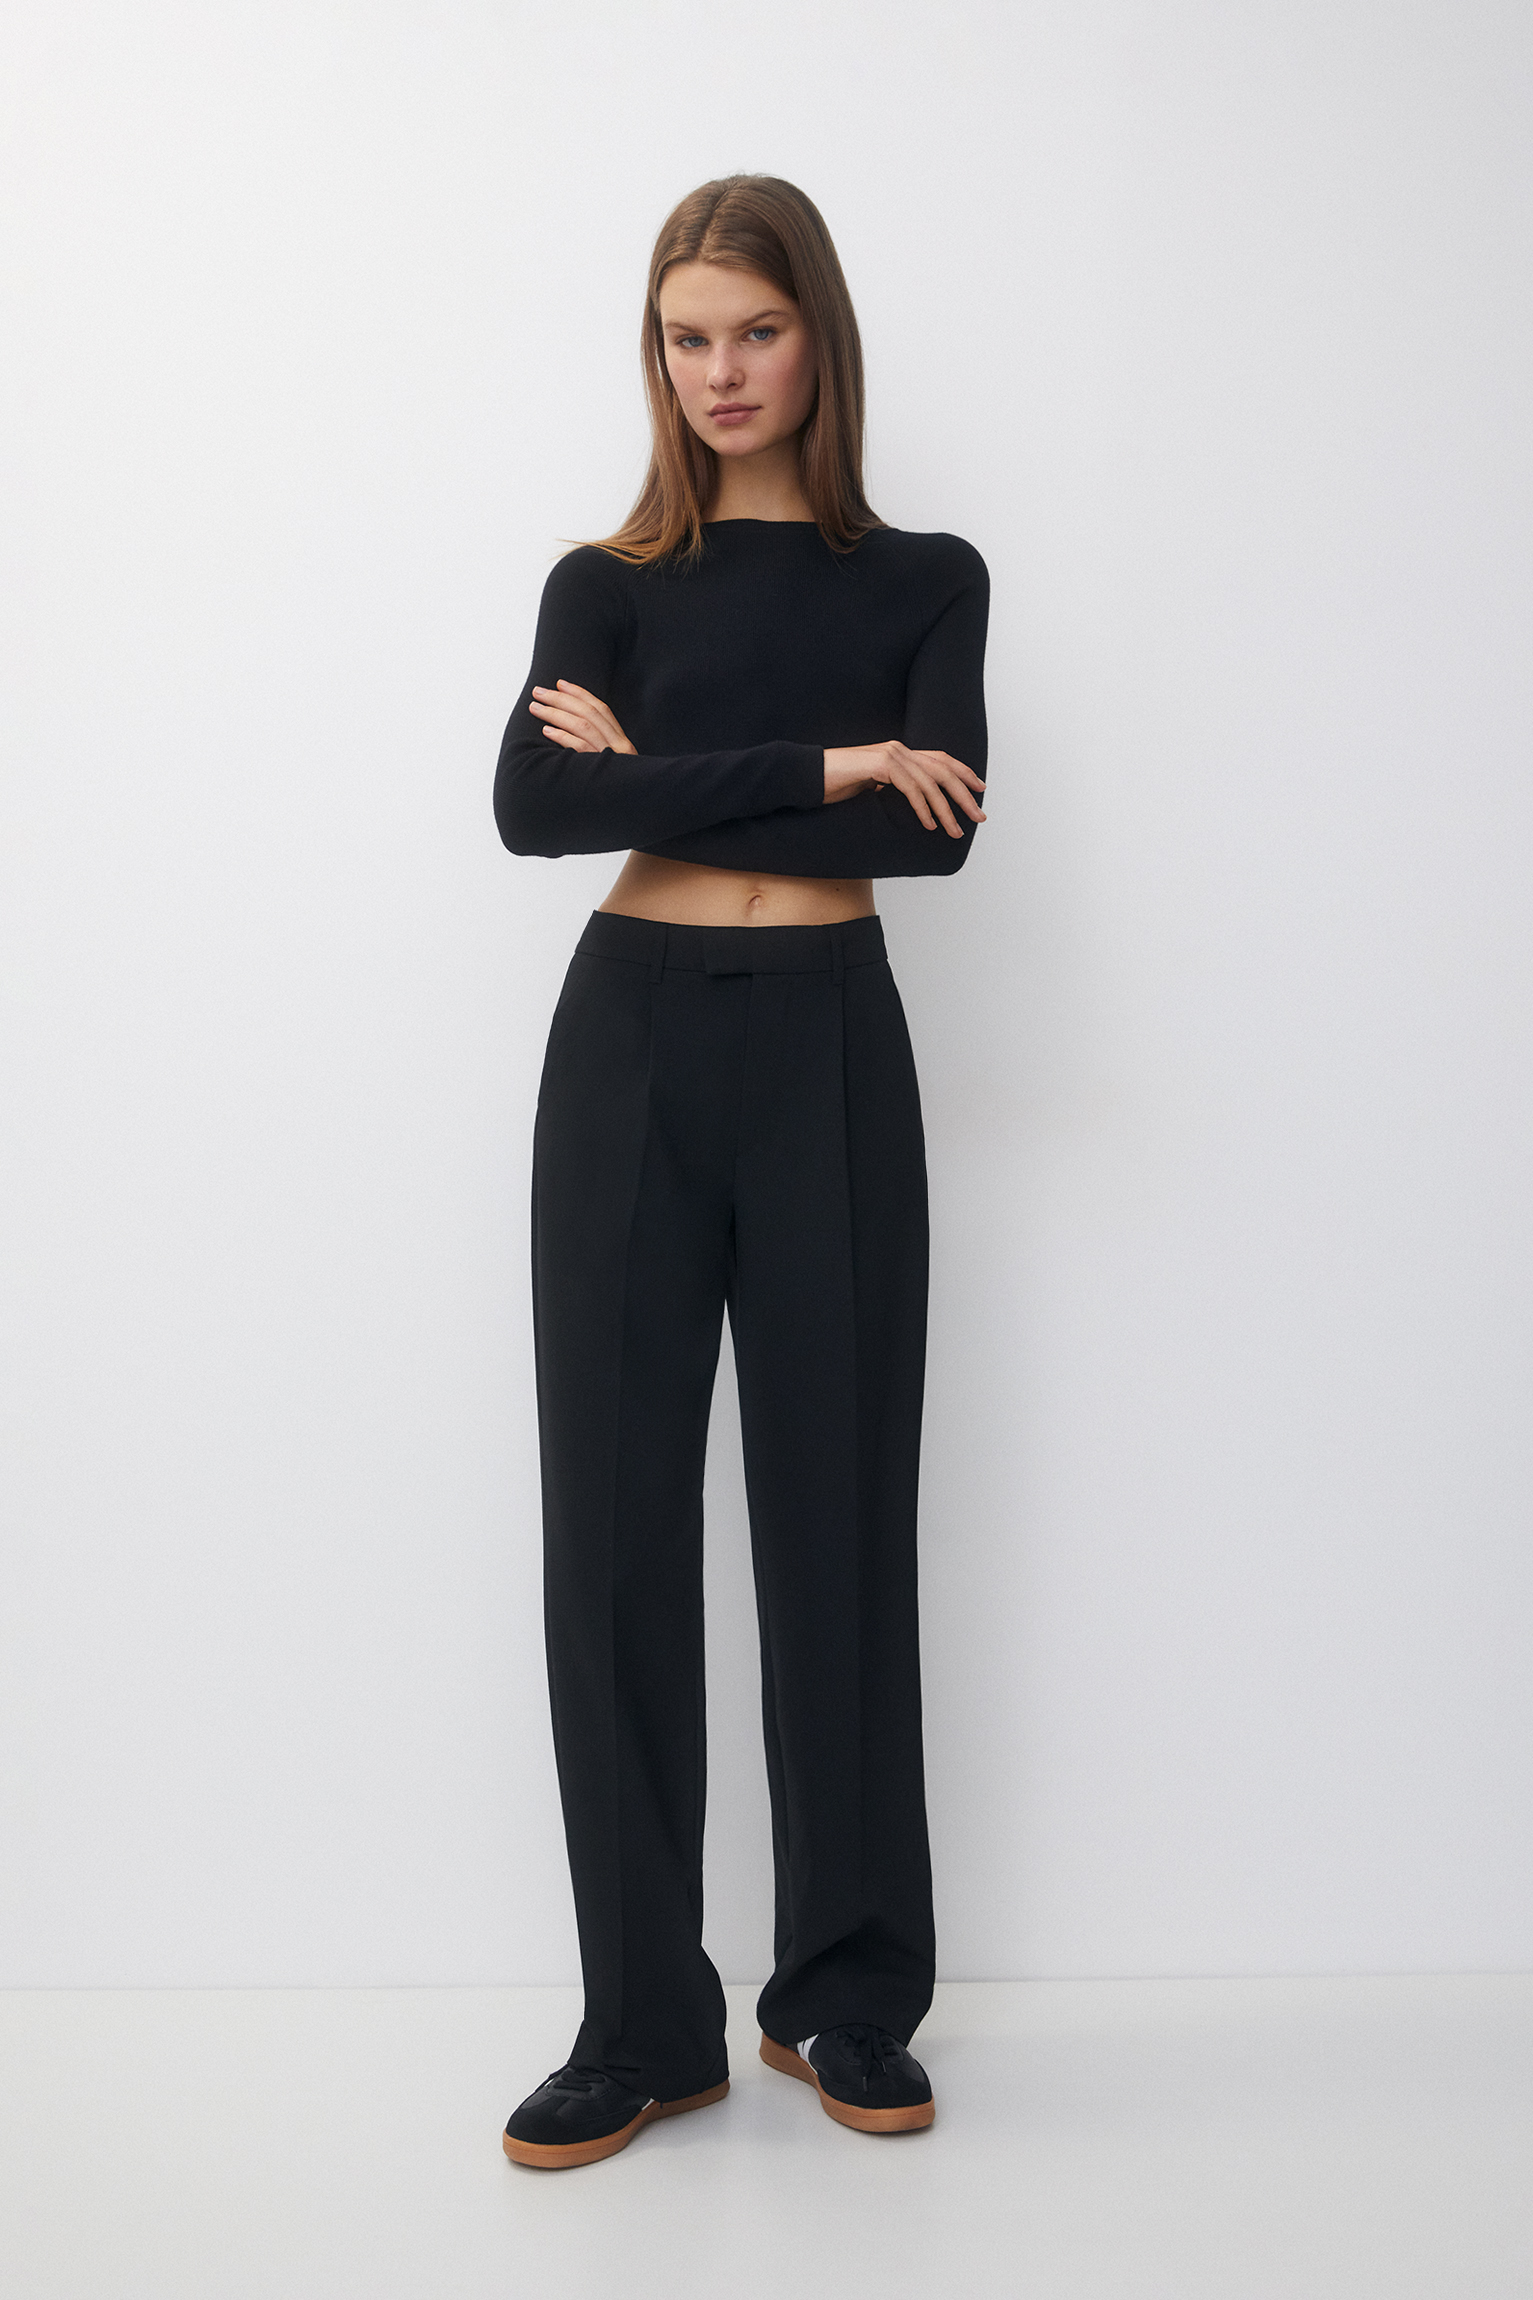 Buy Vetinee 2023 Womens Dress Pants Business Casual High Waisted Wide Leg  Trousers Work Office Pull On Stretch Pants, Black, 12 at Amazon.in